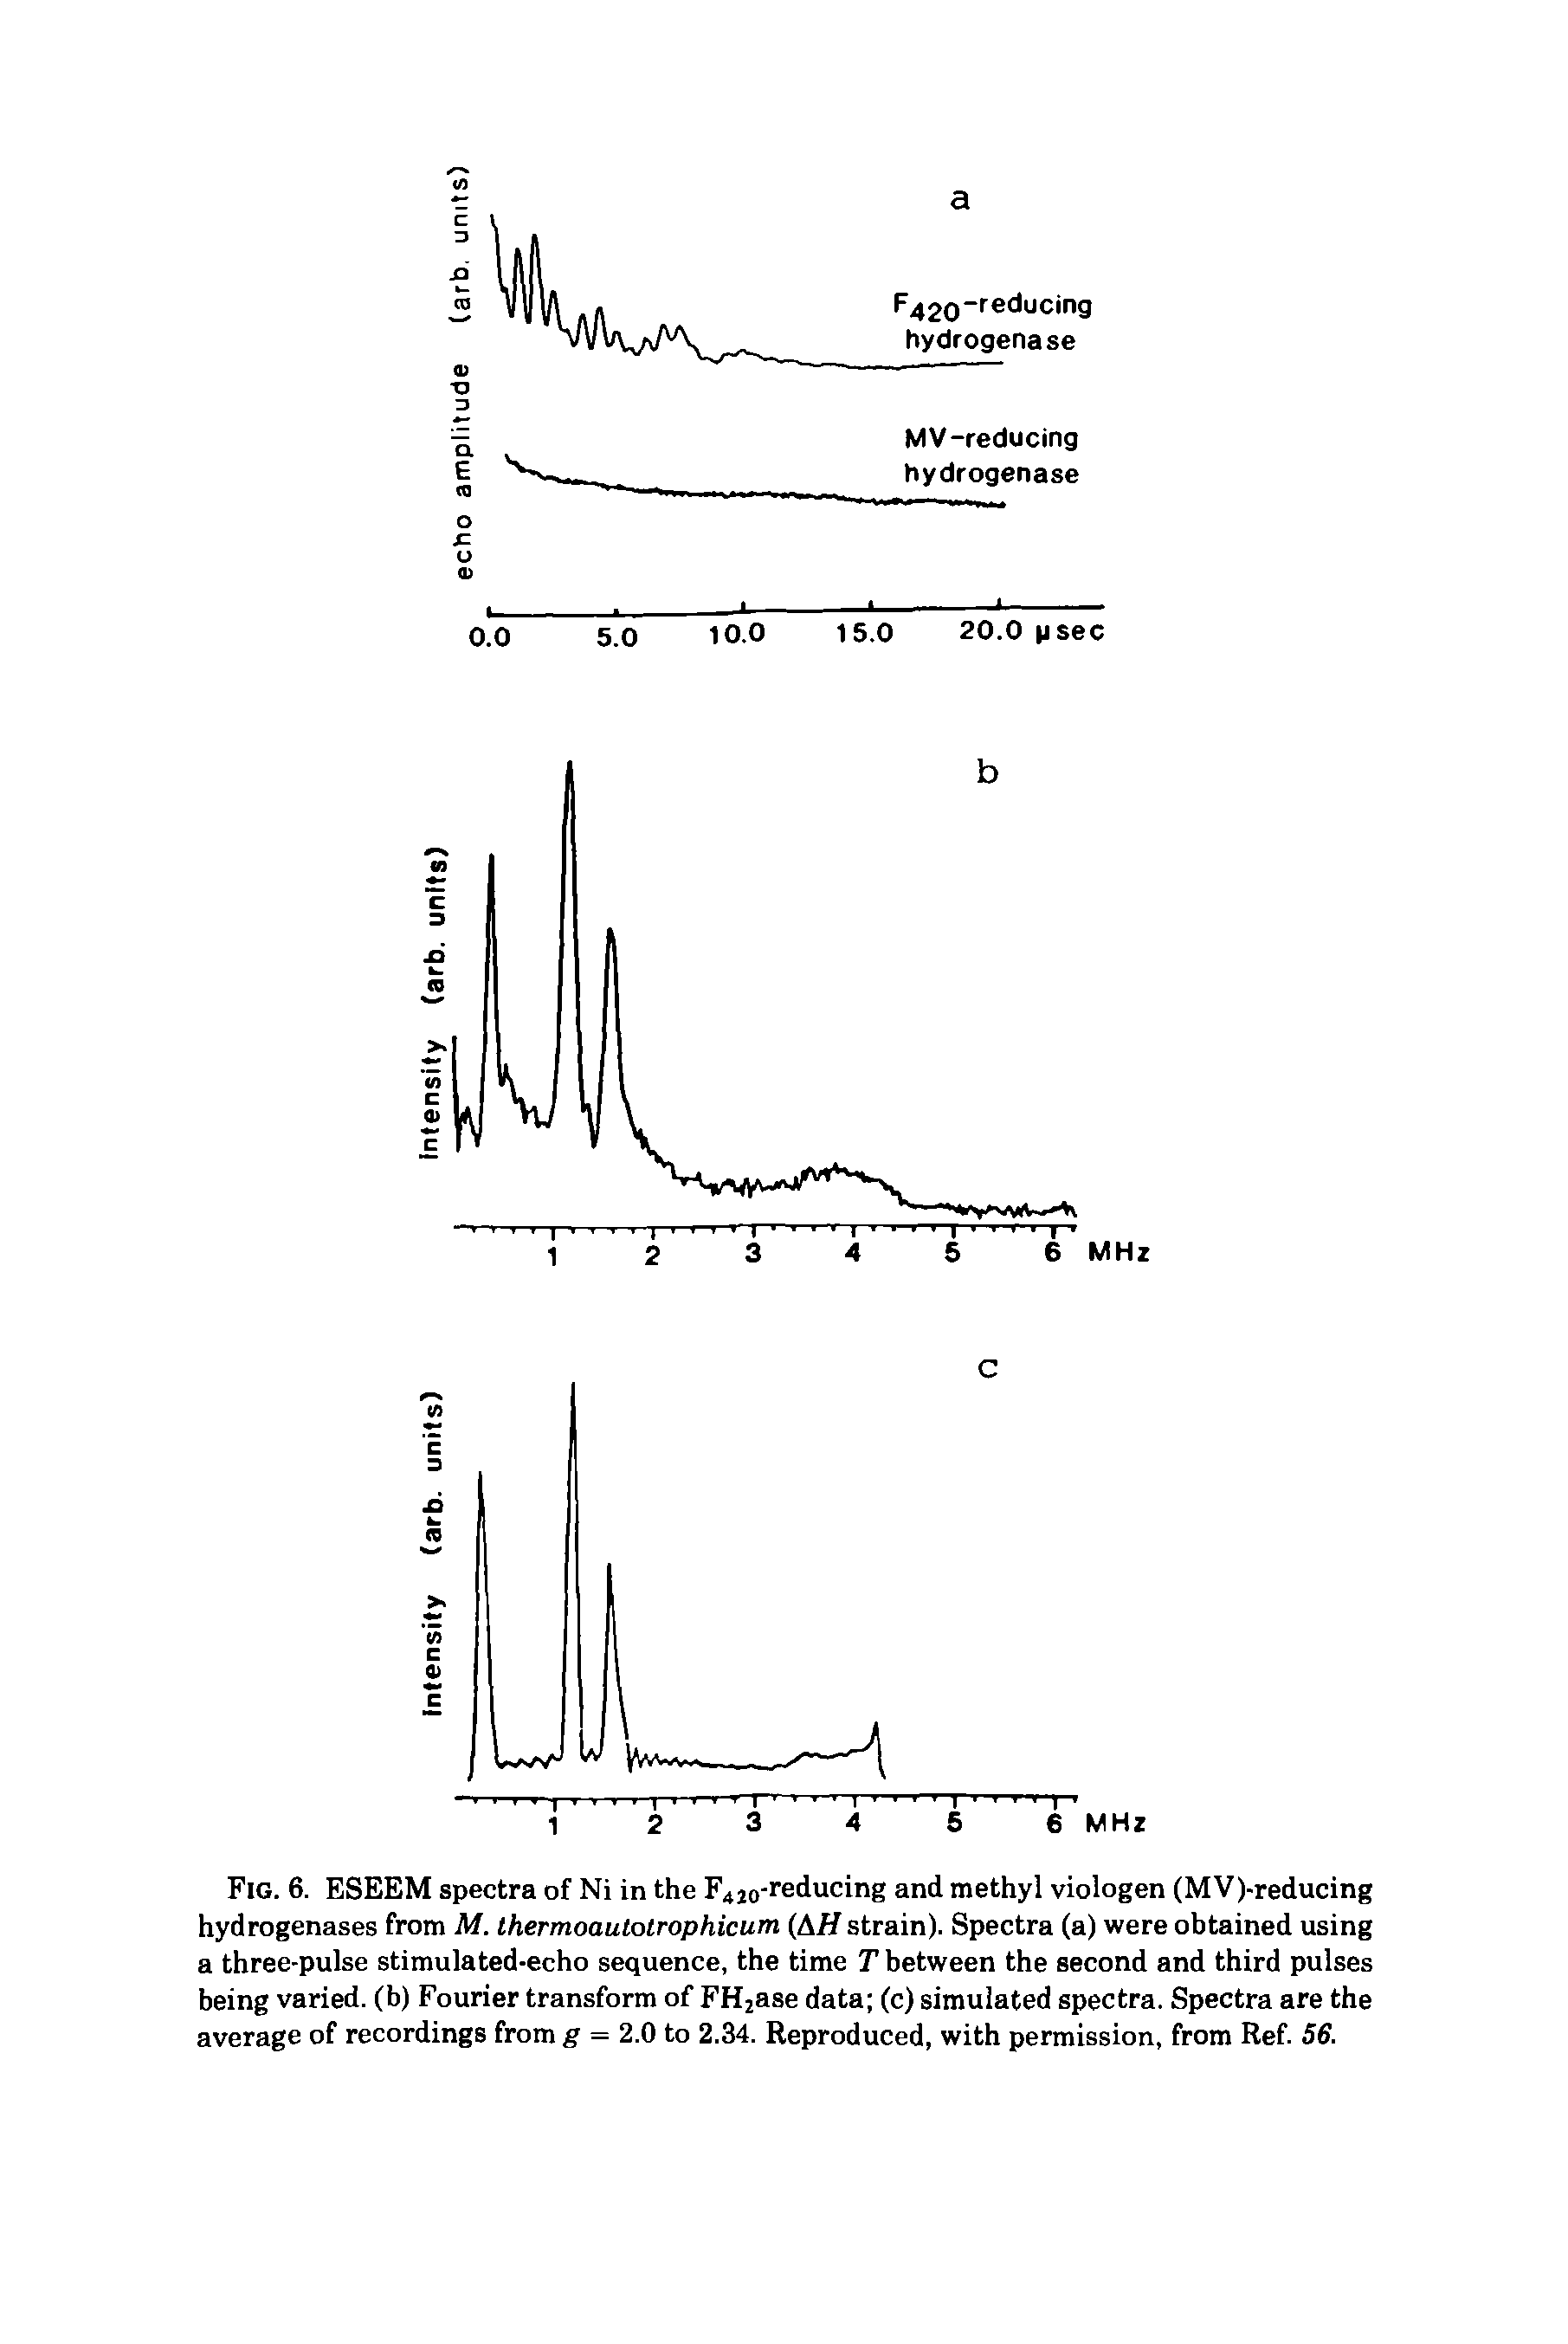 Fig. 6. ESEEM spectra of Ni in the F4j0-reducing and methyl viologen (MV)-reducing hydrogenases from M. thermoautotrophicum (A/f strain). Spectra (a) were obtained using a three-pulse stimulated-echo sequence, the time T between the second and third pulses being varied, (b) Fourier transform of FH2ase data (c) simulated spectra. Spectra are the average of recordings from g = 2.0 to 2.34. Reproduced, with permission, from Ref. 56.